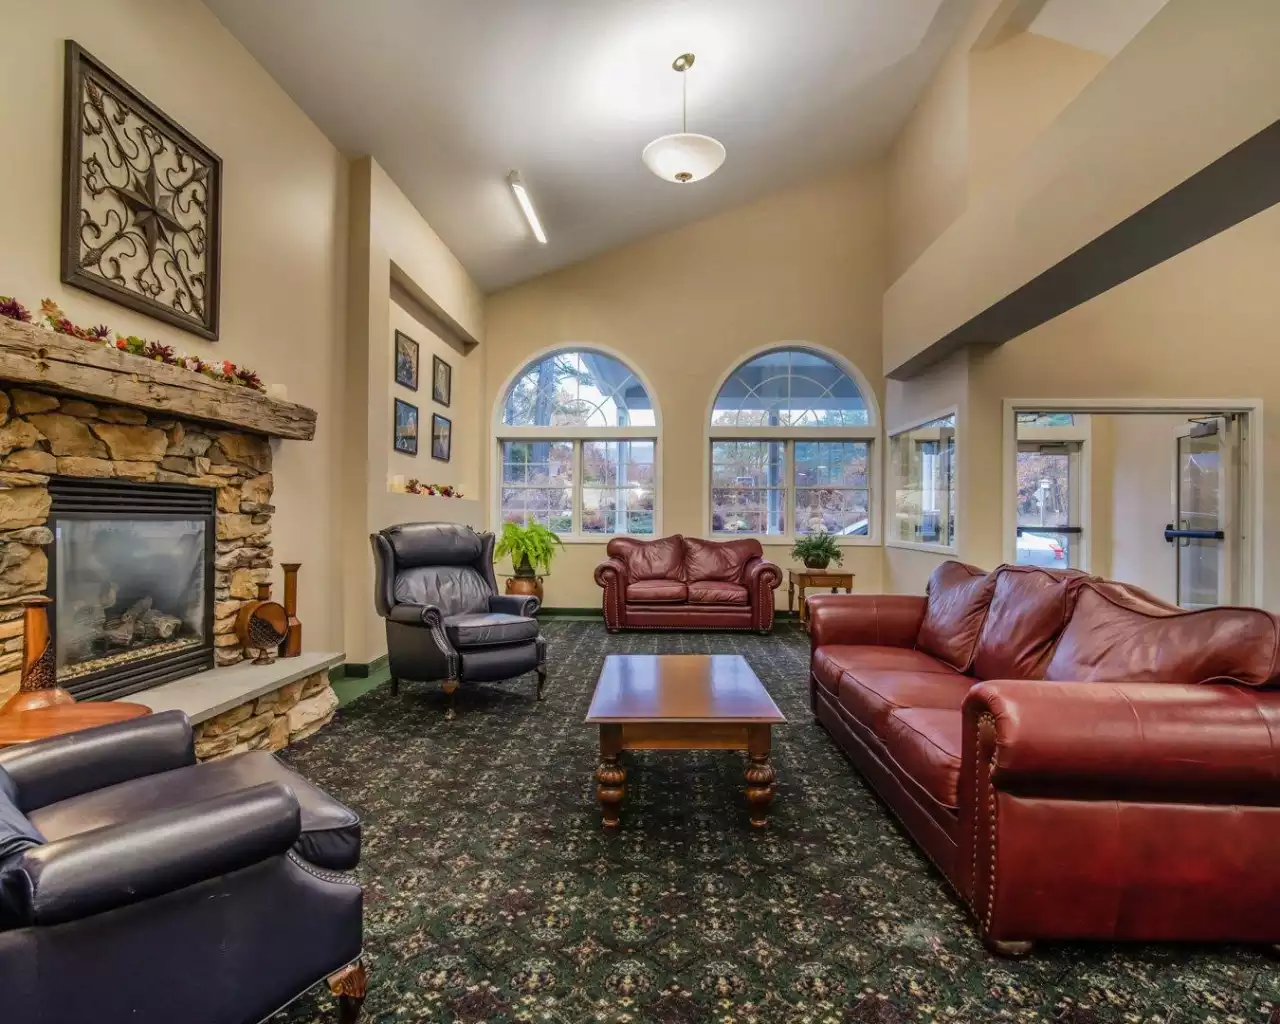 Quality Inn at Quechee Gorge - Lobby with Fireplace